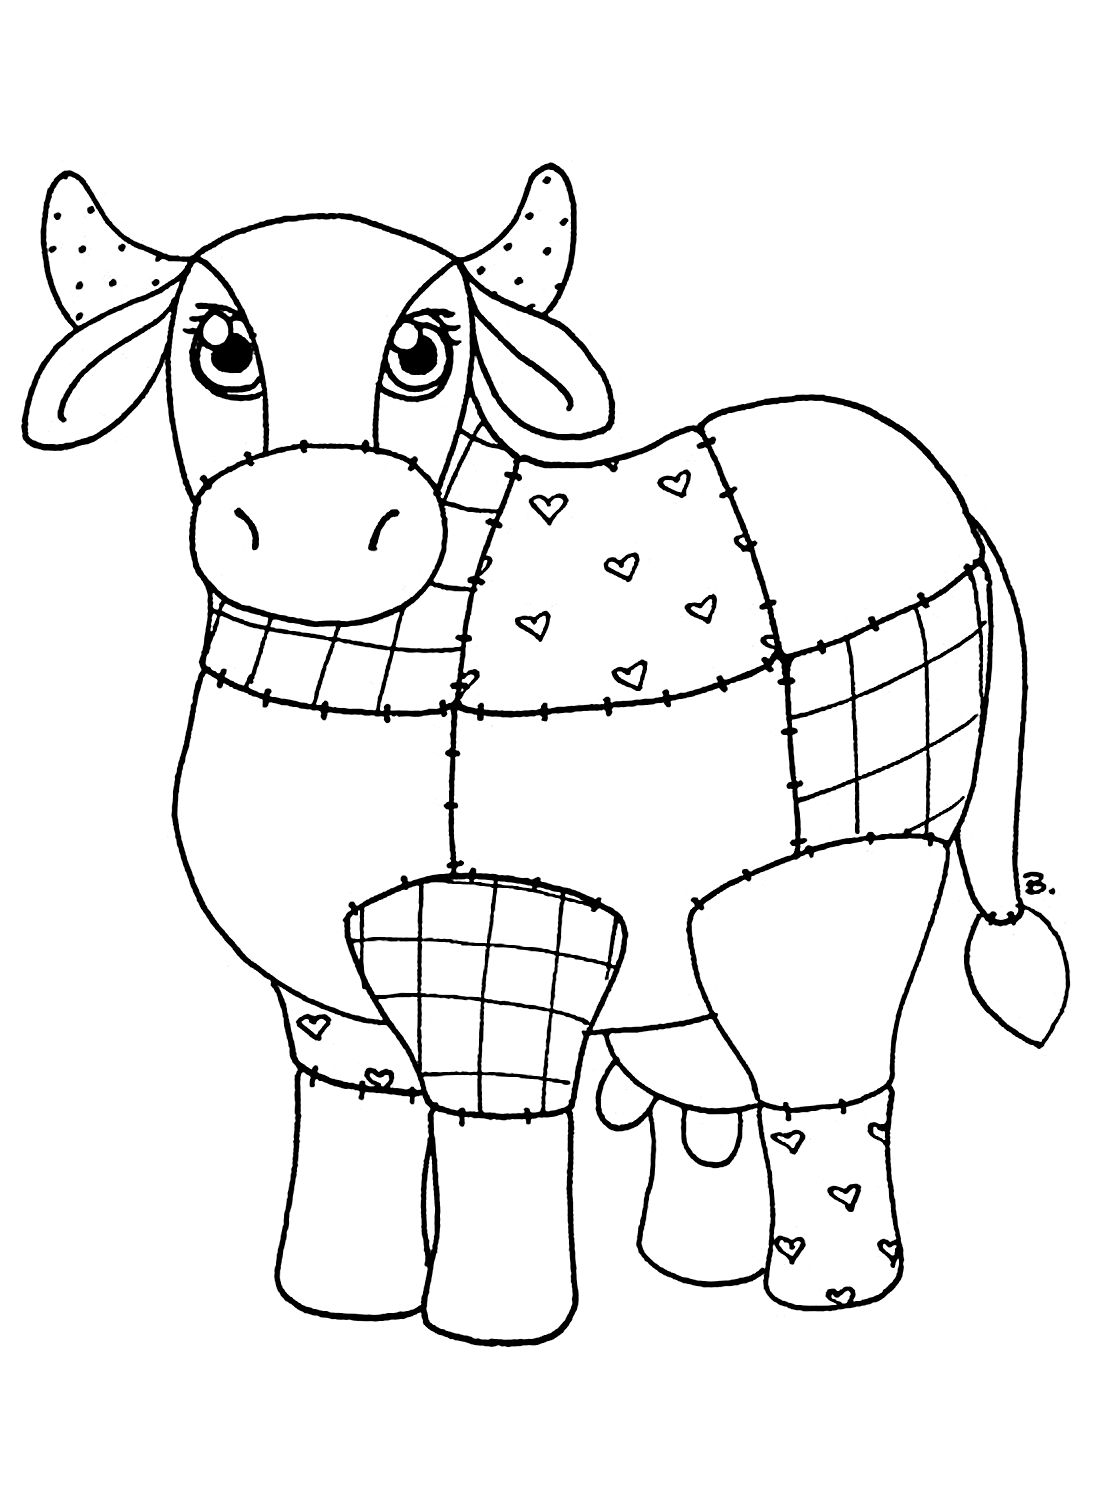 A Cow Toy Coloring Sheet